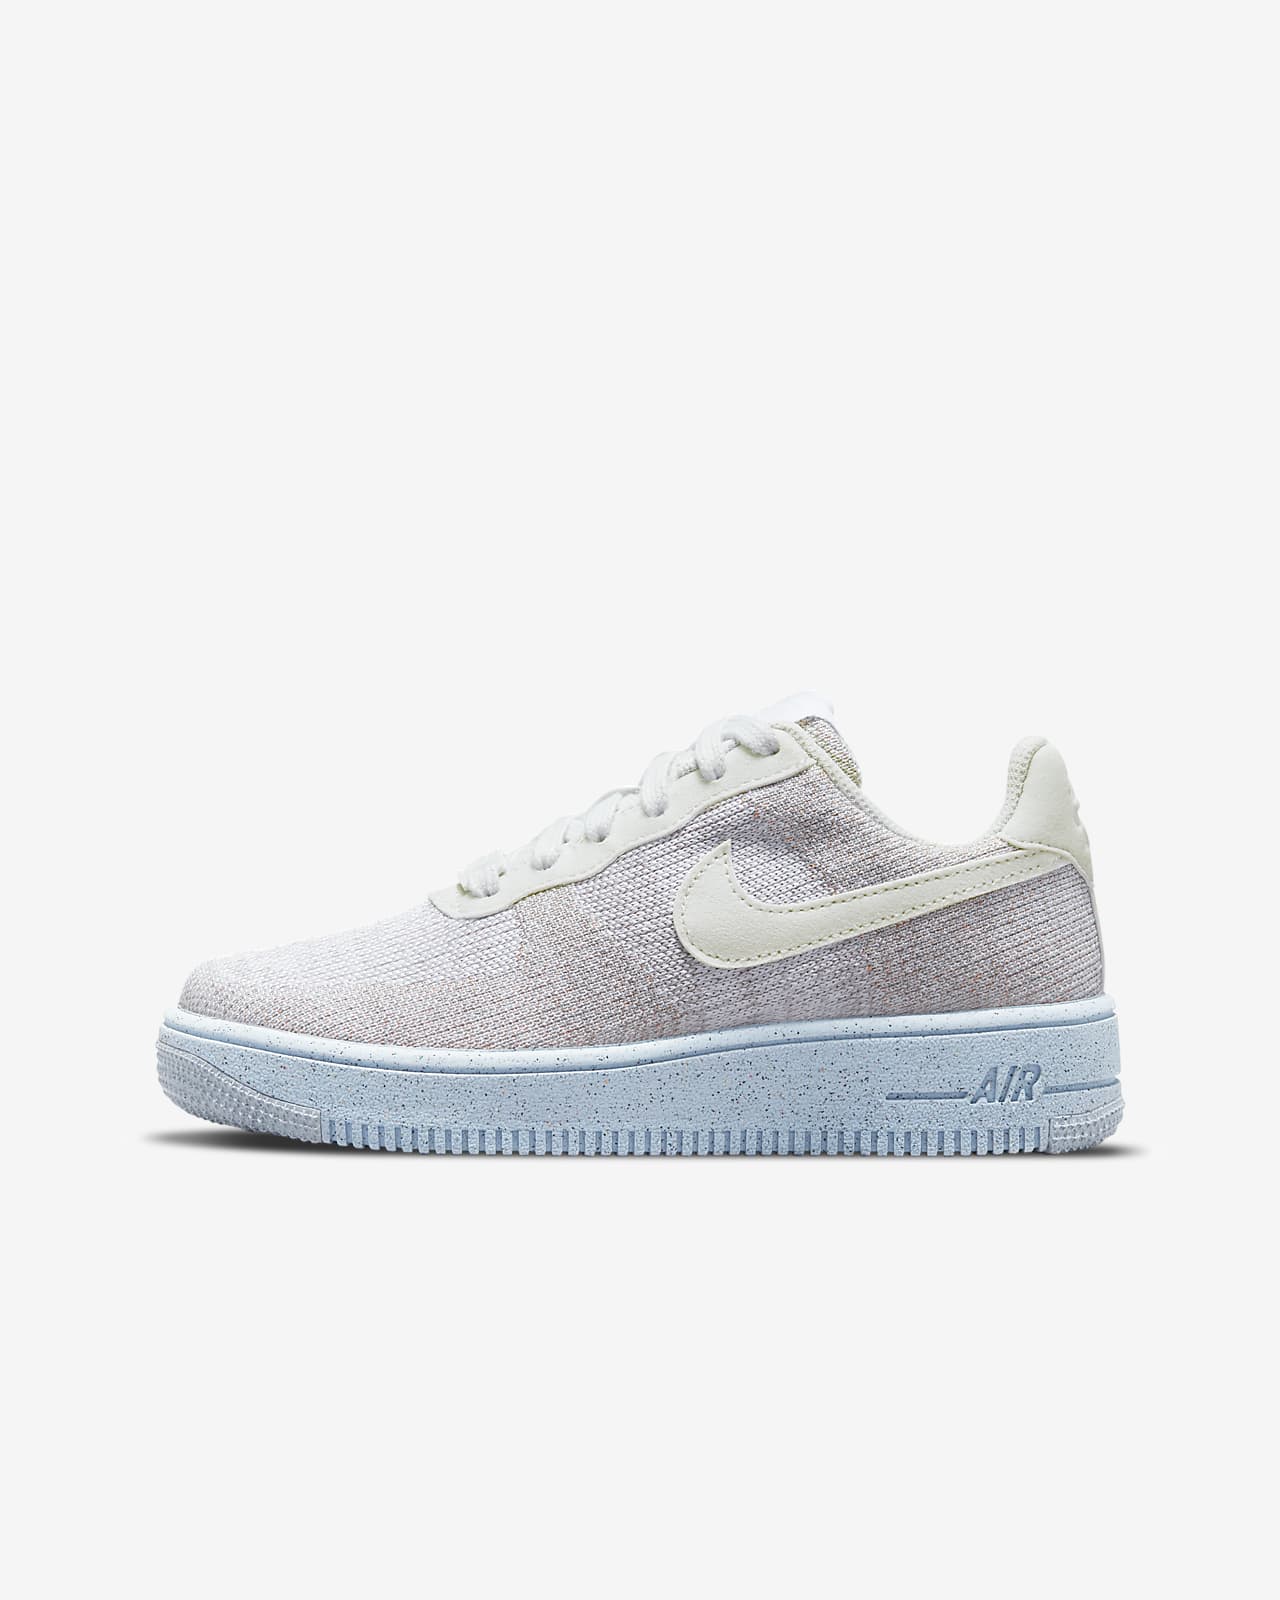 nike.com | Nike Air Force 1 Crater Flyknit